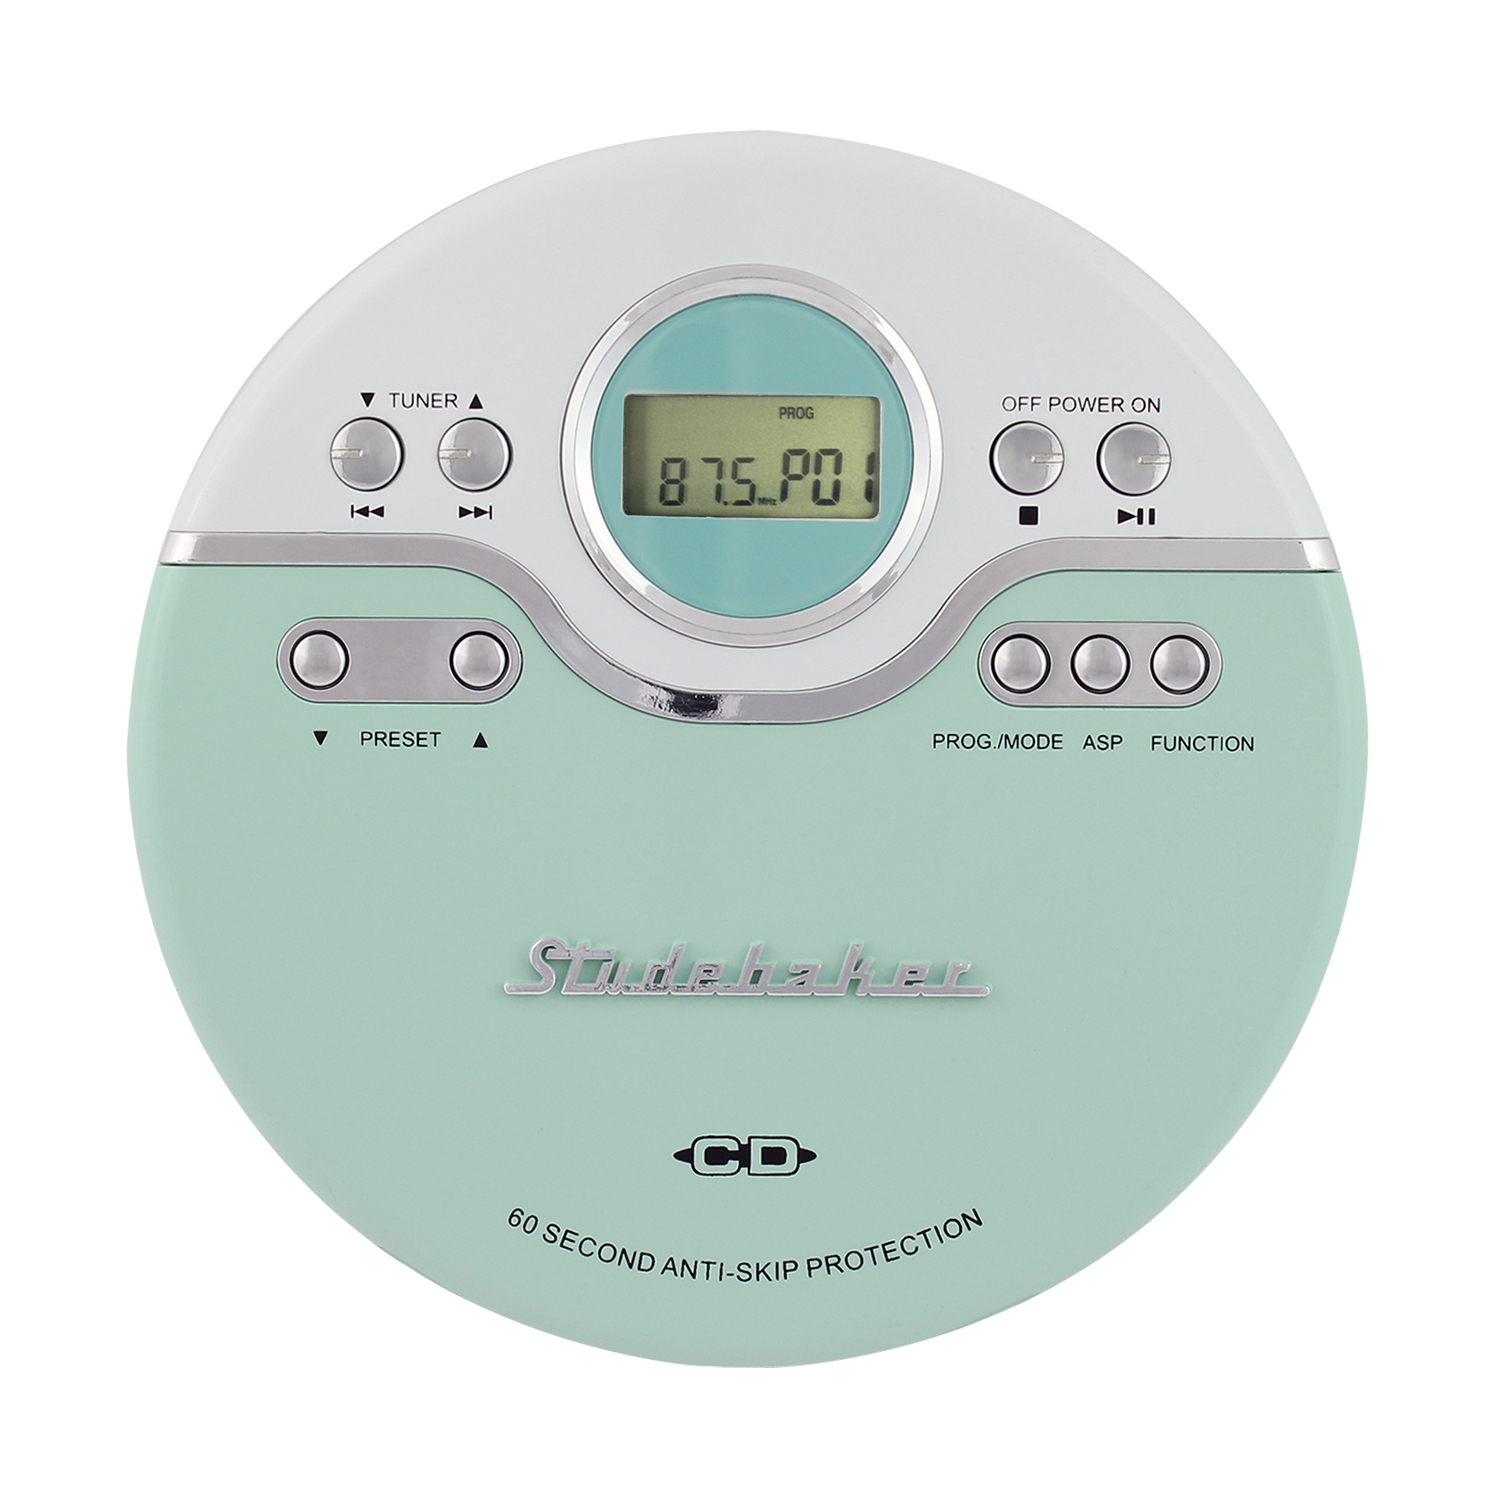 Studebaker Sb3703mw Personal Jogging CD Player with FM Pll Radio (Mint Green/white) - image 1 of 5